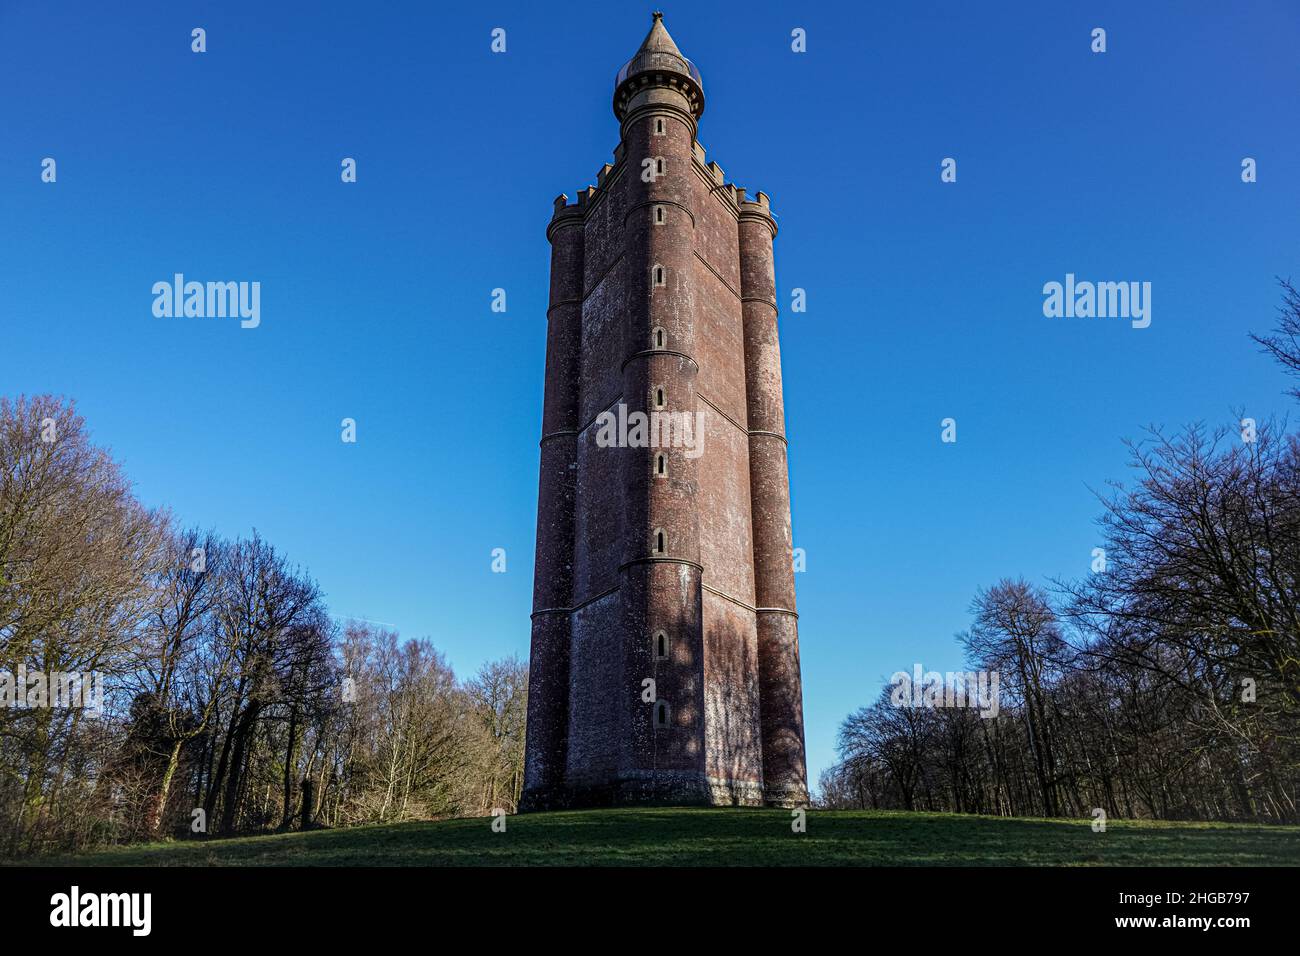 King Alfred's Tower in Sumerset, England Stock Photo